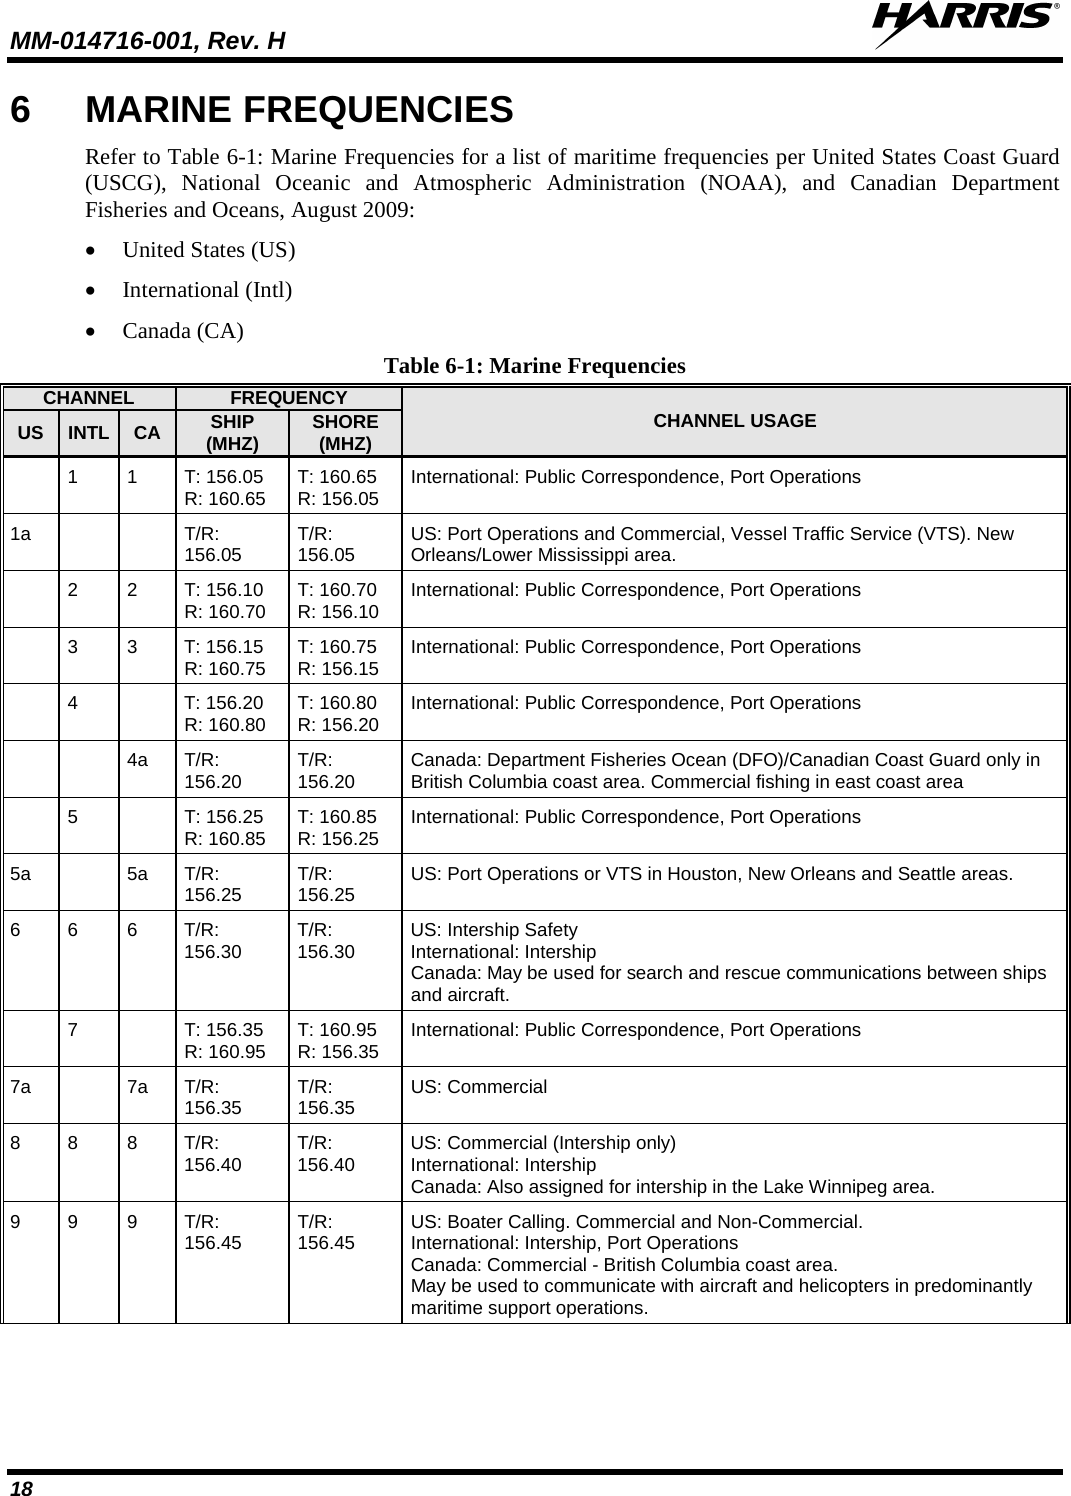 MM-014716-001, Rev. H  18 6  MARINE FREQUENCIES Refer to Table 6-1: Marine Frequencies for a list of maritime frequencies per United States Coast Guard (USCG), National Oceanic and Atmospheric Administration (NOAA), and Canadian Department Fisheries and Oceans, August 2009: • United States (US) • International (Intl) • Canada (CA) Table 6-1: Marine Frequencies CHANNEL FREQUENCY CHANNEL USAGE US INTL CA SHIP (MHZ) SHORE (MHZ)  1 1 T: 156.05 R: 160.65 T: 160.65 R: 156.05 International: Public Correspondence, Port Operations 1a   T/R: 156.05 T/R: 156.05 US: Port Operations and Commercial, Vessel Traffic Service (VTS). New Orleans/Lower Mississippi area.   2 2 T: 156.10 R: 160.70 T: 160.70  R: 156.10 International: Public Correspondence, Port Operations   3  3  T: 156.15 R: 160.75 T: 160.75 R: 156.15 International: Public Correspondence, Port Operations   4    T: 156.20  R: 160.80 T: 160.80  R: 156.20 International: Public Correspondence, Port Operations   4a T/R: 156.20 T/R: 156.20 Canada: Department Fisheries Ocean (DFO)/Canadian Coast Guard only in British Columbia coast area. Commercial fishing in east coast area  5  T: 156.25  R: 160.85 T: 160.85  R: 156.25 International: Public Correspondence, Port Operations 5a  5a T/R: 156.25 T/R: 156.25 US: Port Operations or VTS in Houston, New Orleans and Seattle areas. 6  6  6  T/R: 156.30 T/R: 156.30 US: Intership Safety International: Intership Canada: May be used for search and rescue communications between ships and aircraft.  7  T: 156.35  R: 160.95 T: 160.95  R: 156.35 International: Public Correspondence, Port Operations 7a    7a T/R: 156.35 T/R: 156.35 US: Commercial 8  8  8  T/R: 156.40 T/R: 156.40 US: Commercial (Intership only) International: Intership Canada: Also assigned for intership in the Lake Winnipeg area. 9 9 9 T/R: 156.45 T/R: 156.45 US: Boater Calling. Commercial and Non-Commercial. International: Intership, Port Operations Canada: Commercial - British Columbia coast area. May be used to communicate with aircraft and helicopters in predominantly maritime support operations. 